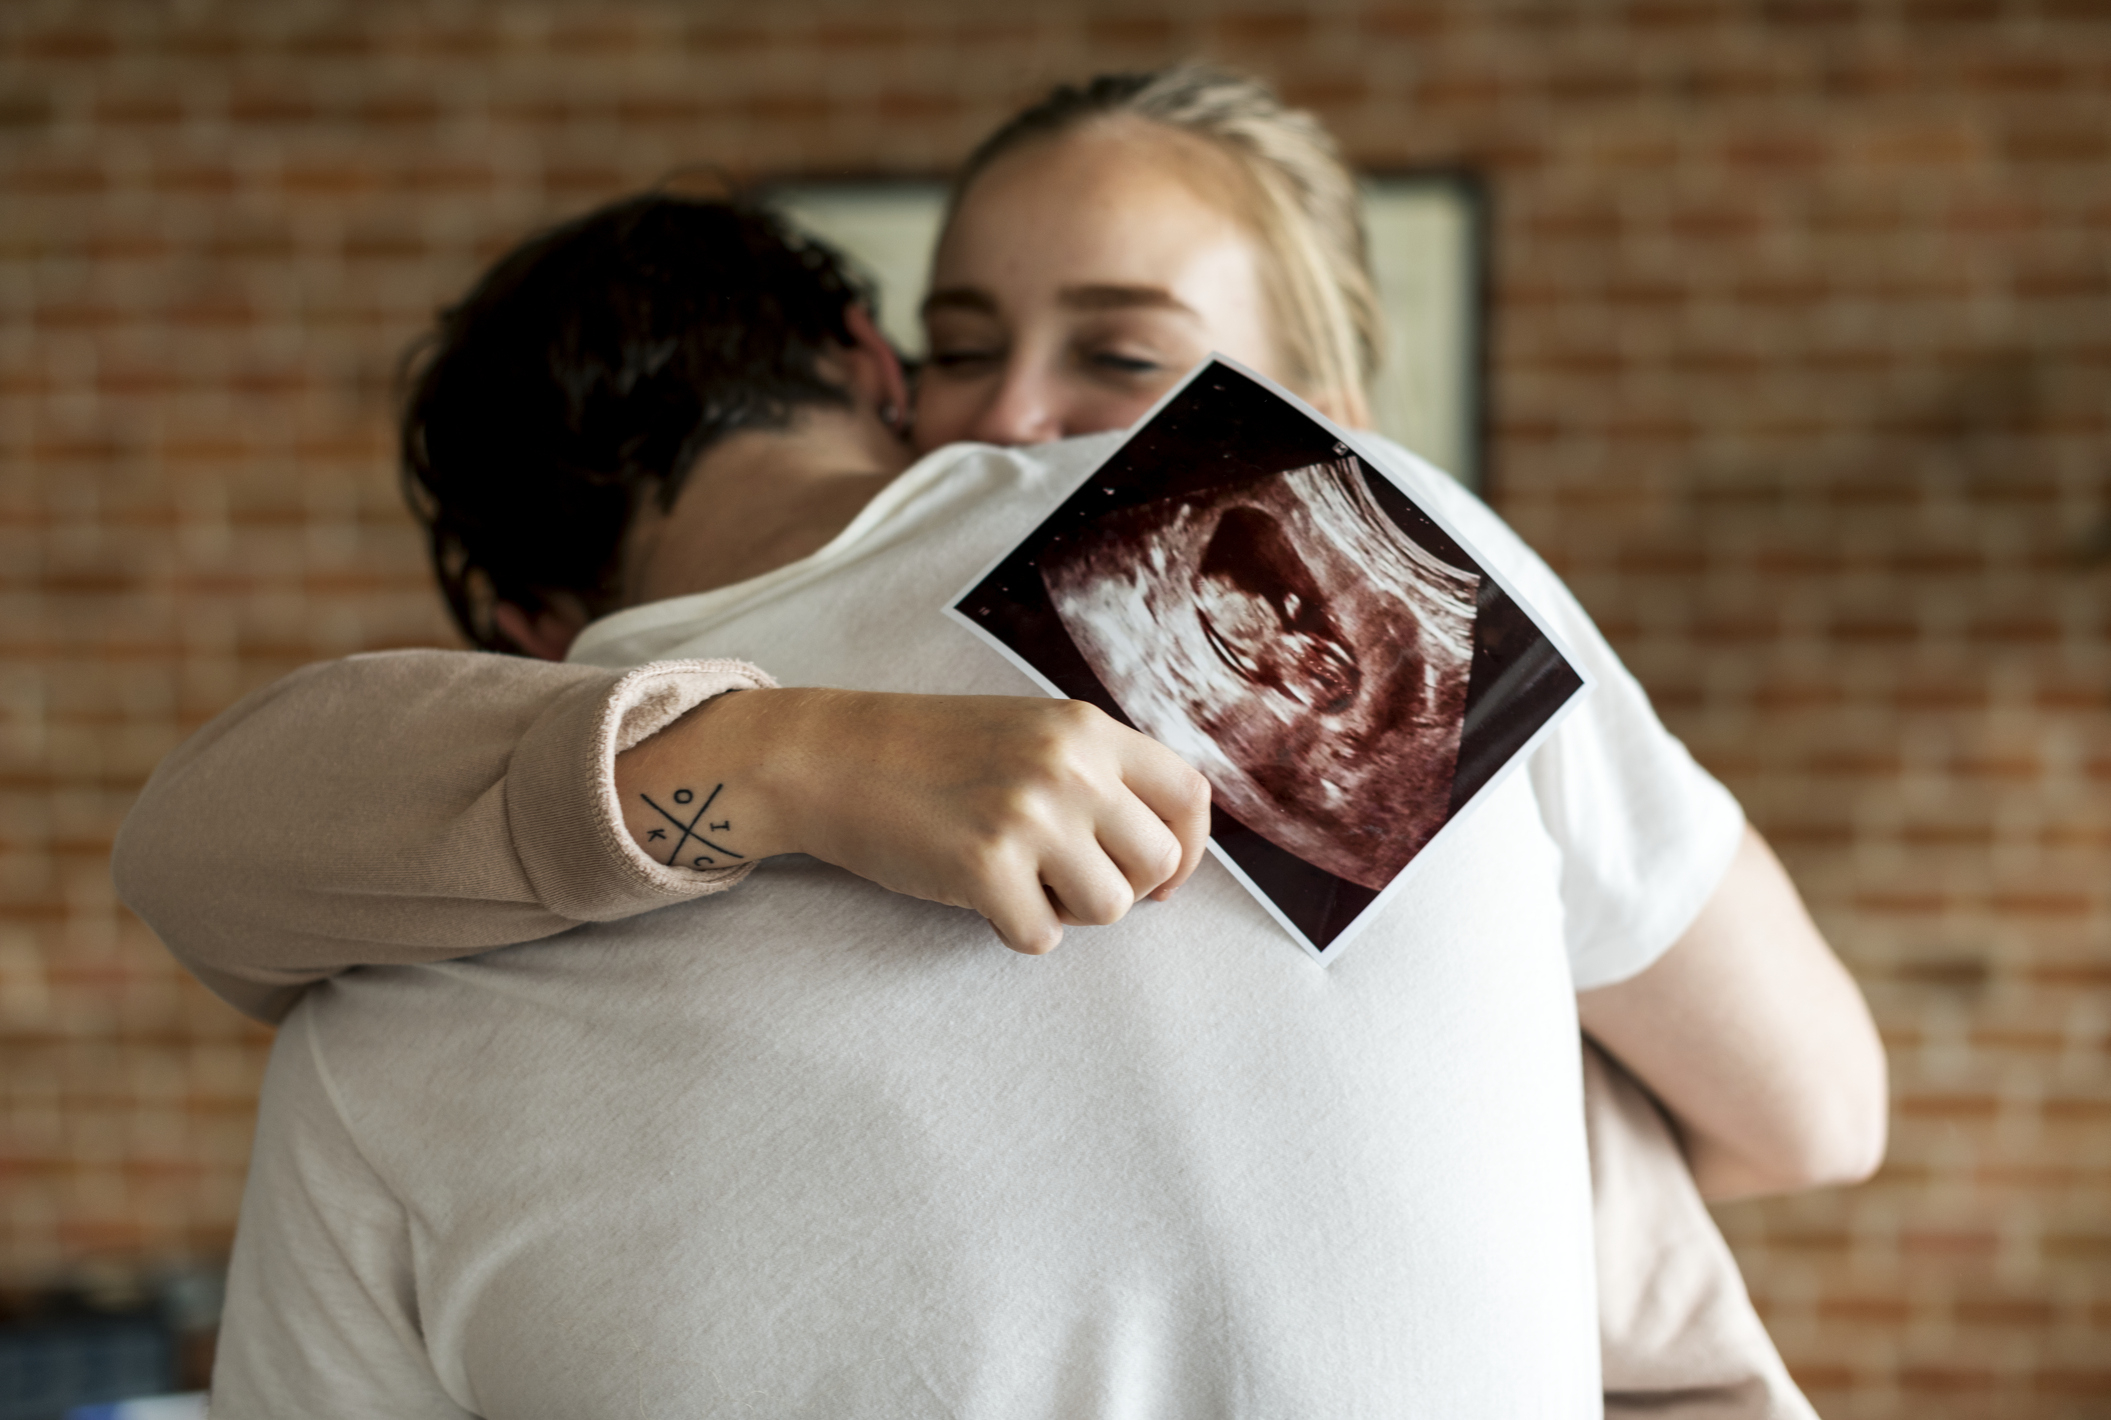 Couple embracing and holding an ultrasound image, suggesting pregnancy